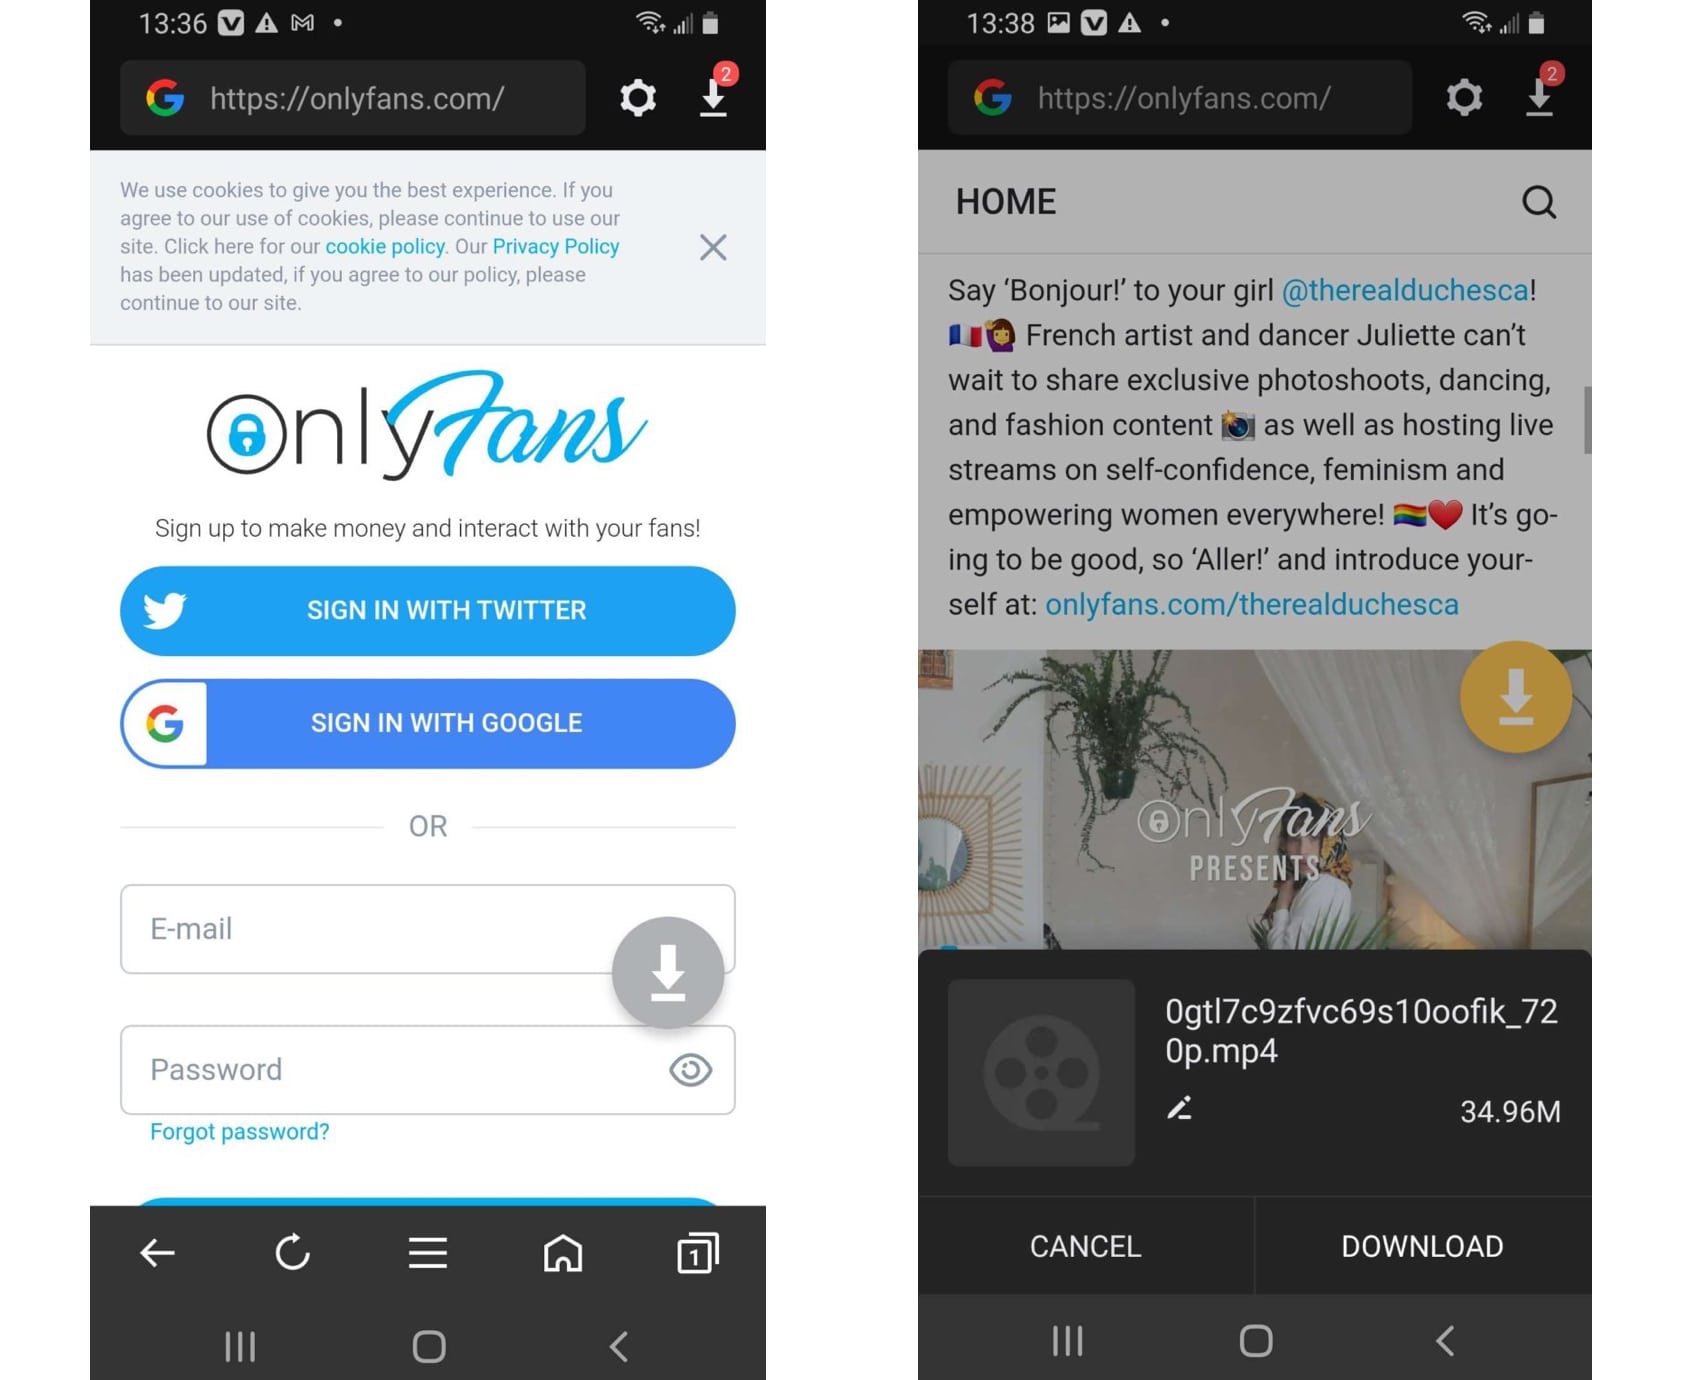 How to use downloader for onlyfans.com